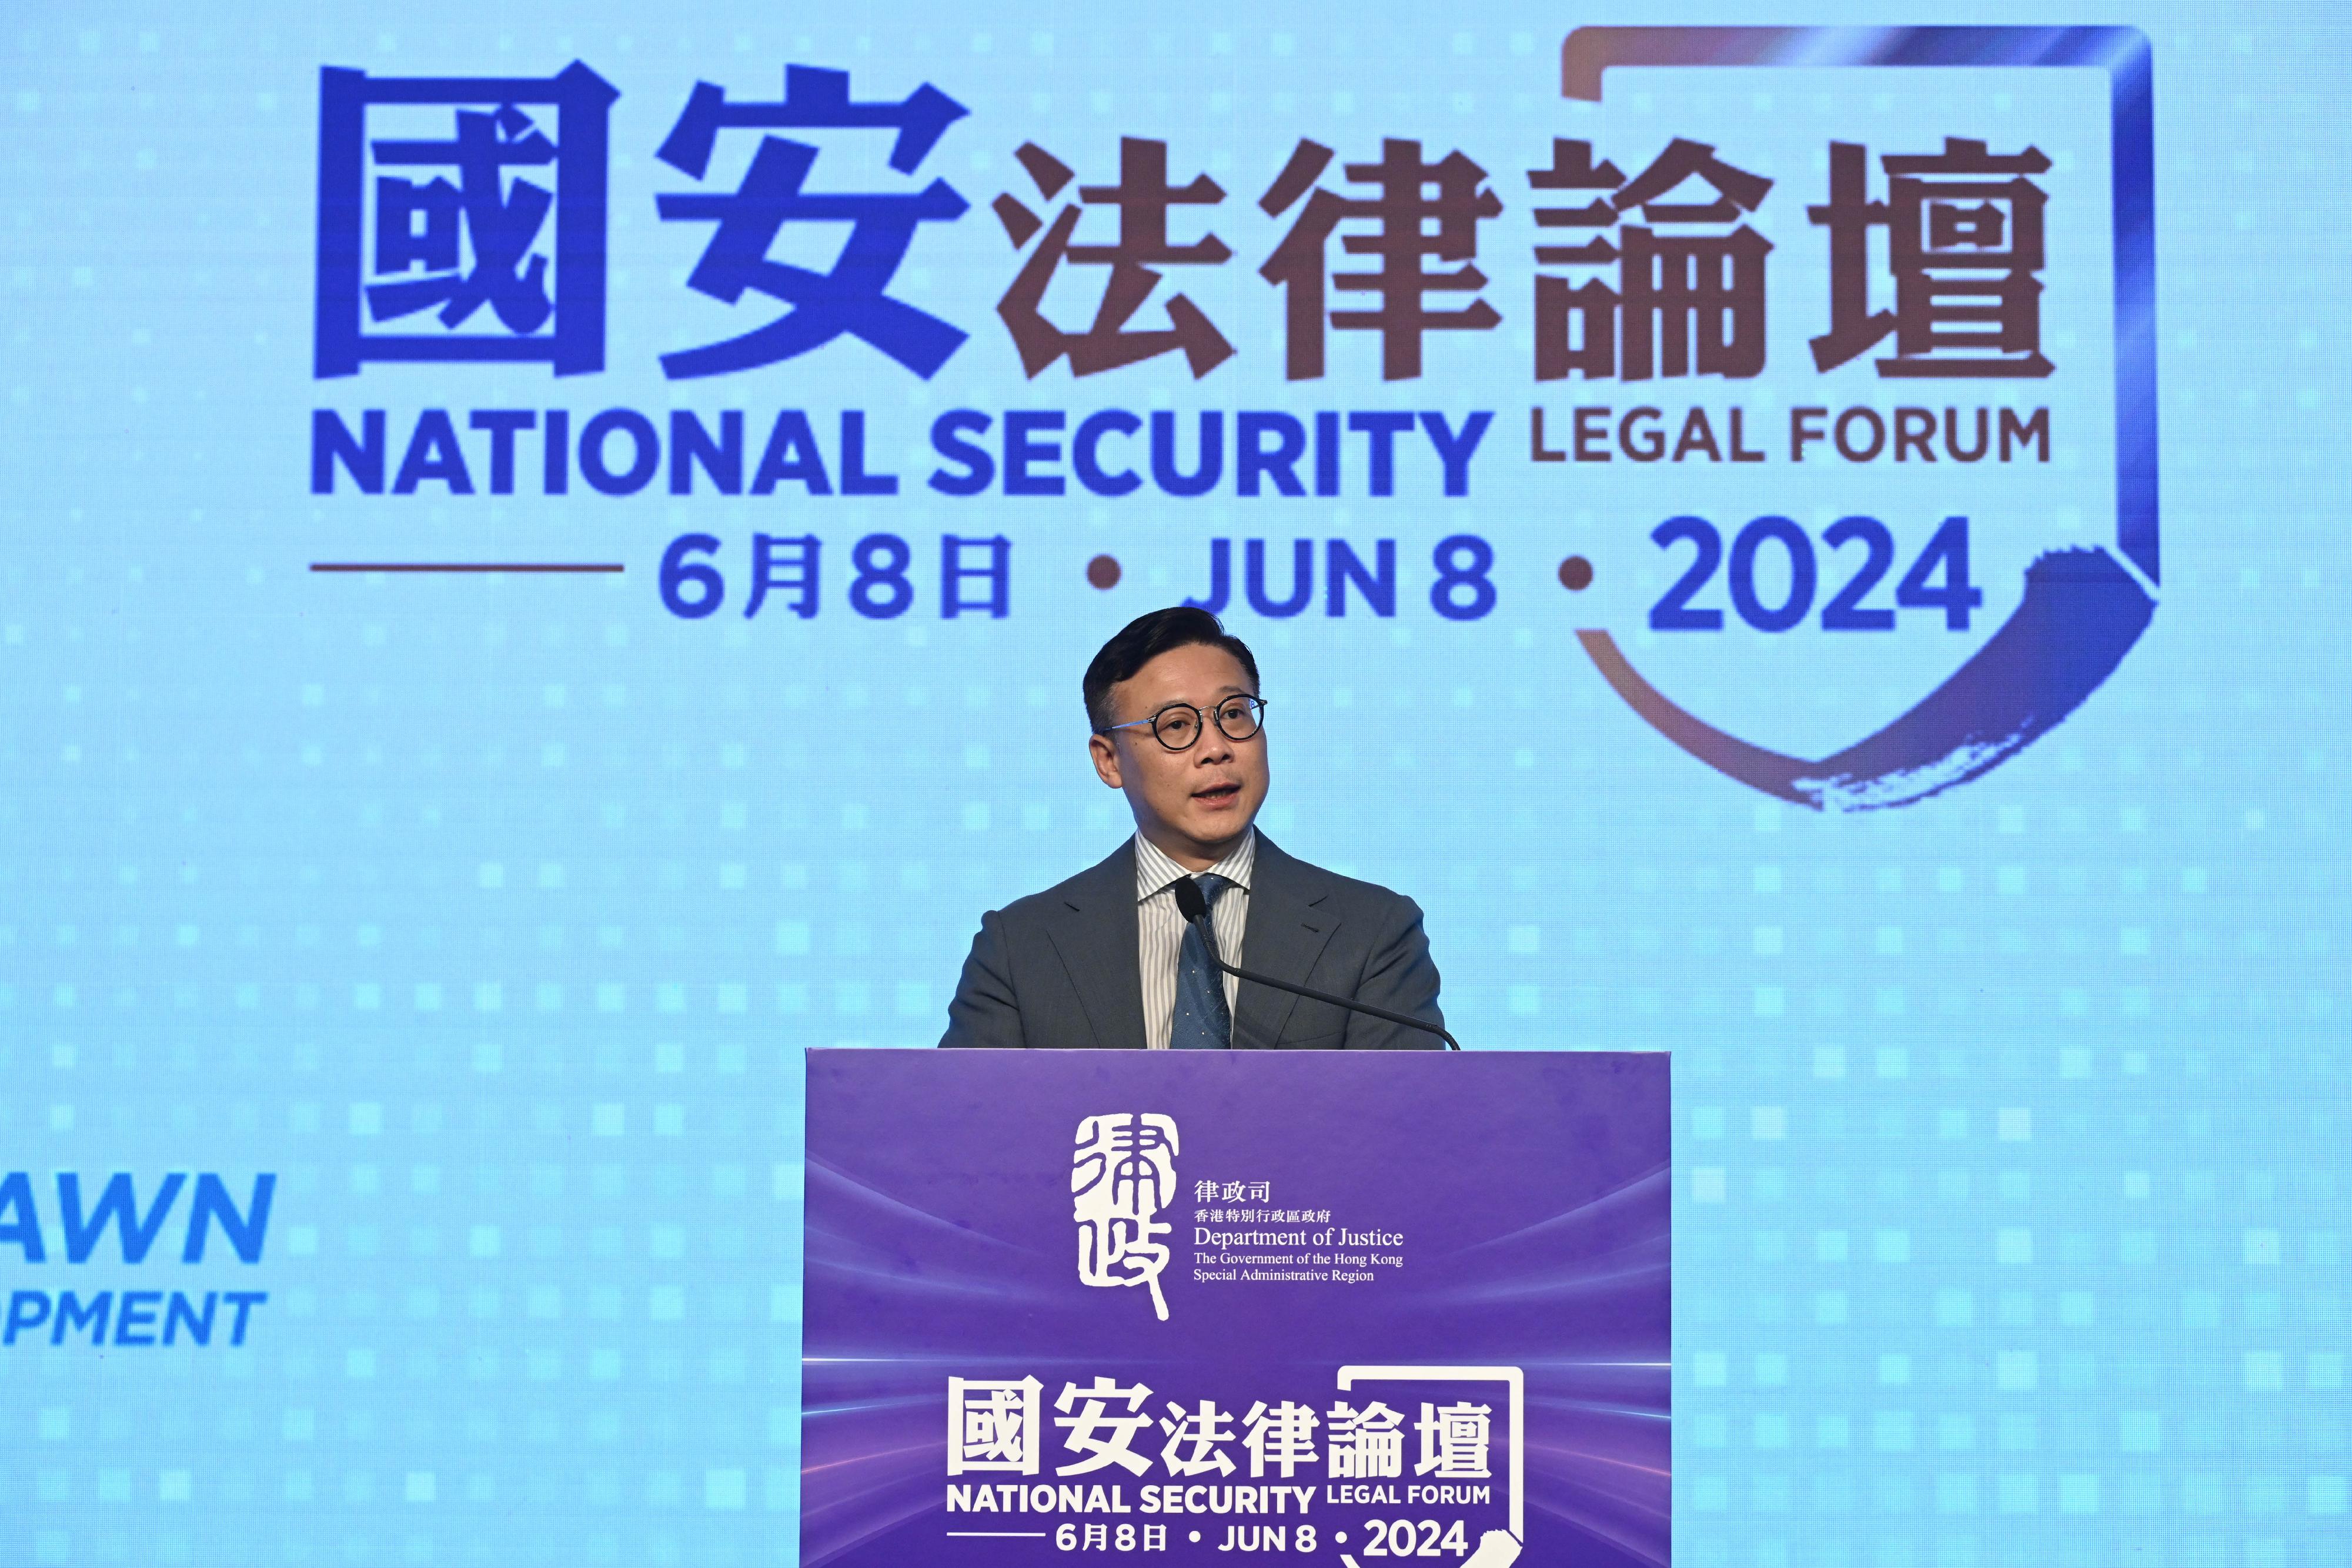 The Department of Justice today (June 8) held the National Security Legal Forum with the theme of "Looking Back and Ahead, New Dawn for Development". Photo shows the Deputy Secretary for Justice, Mr Cheung Kwok-kwan, delivering his closing remarks at the forum.